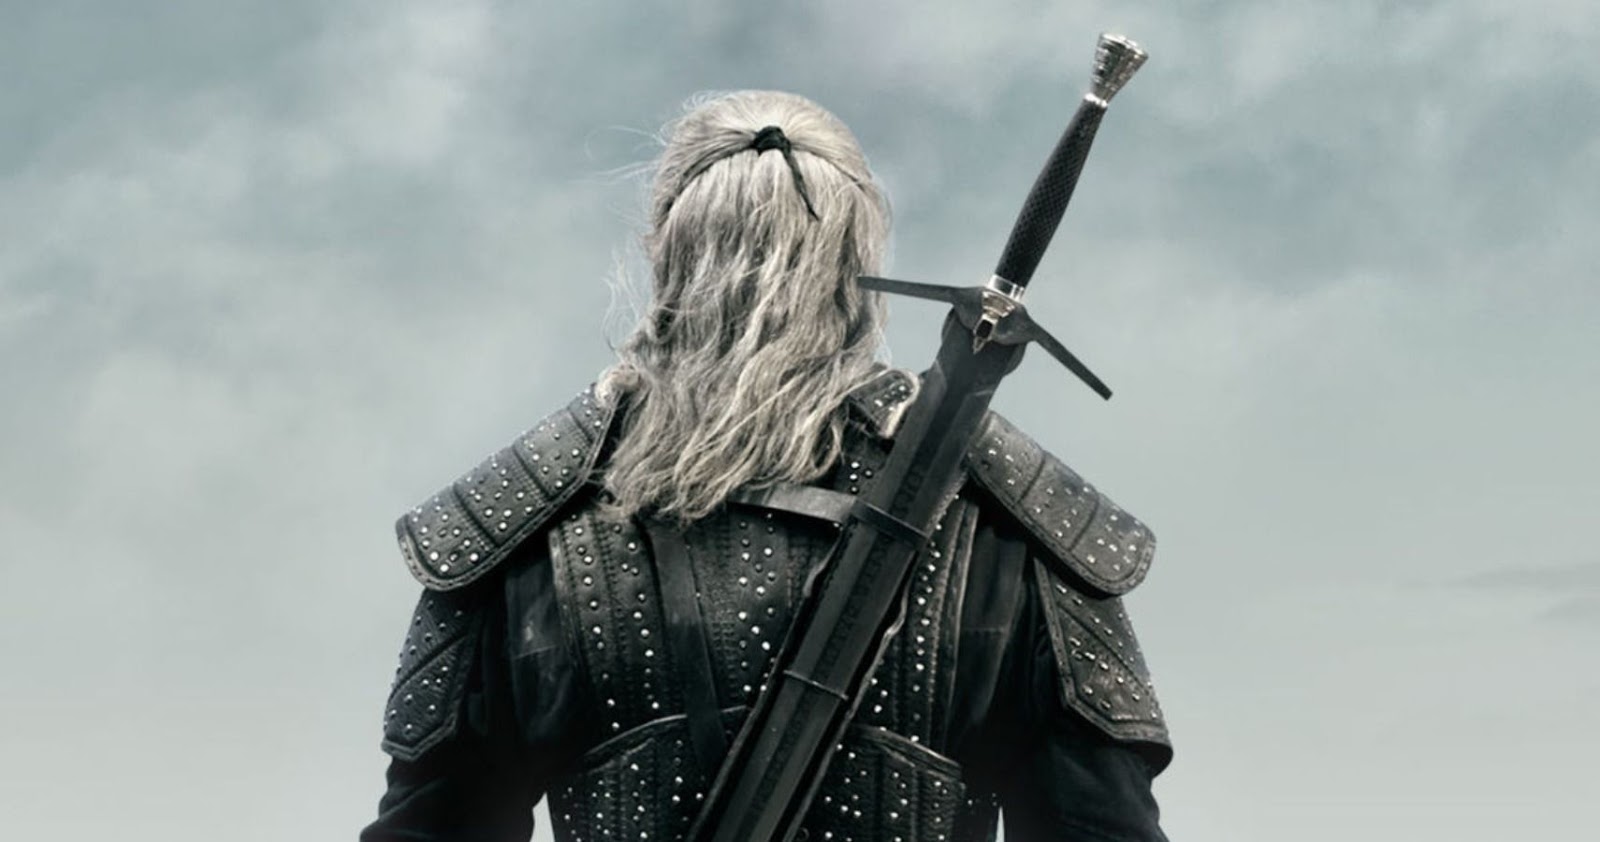 Geralt with one sword on his back in The Witcher Series